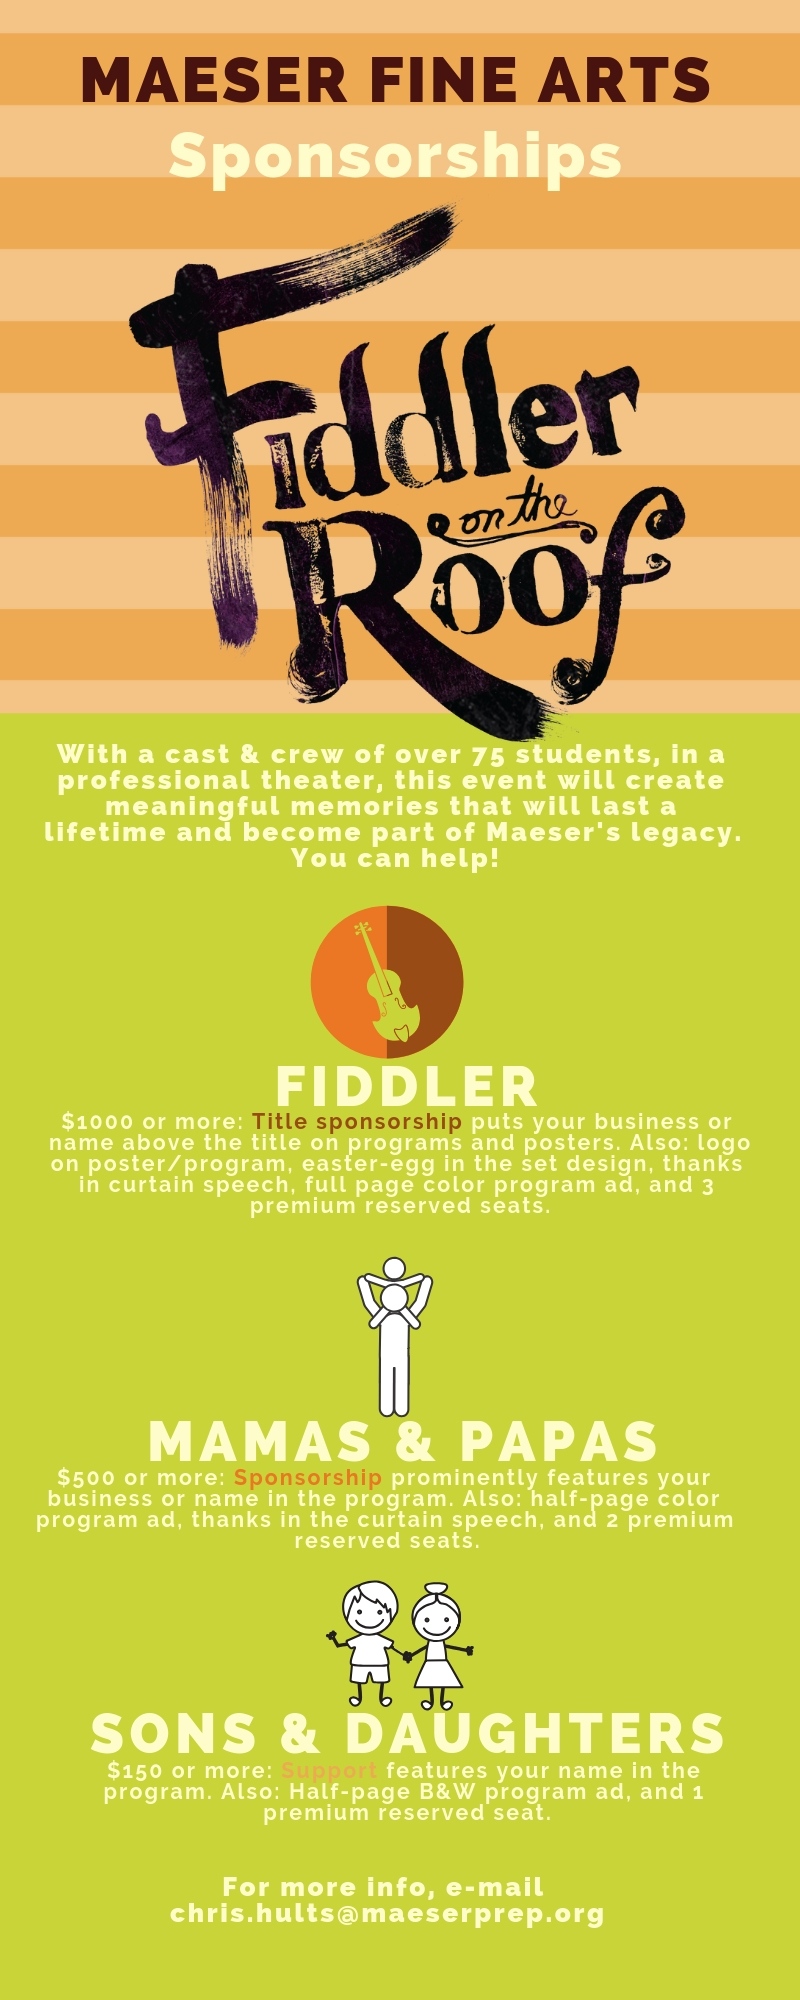 Infographic showing sponsorship levels for Fiddler on the Roof